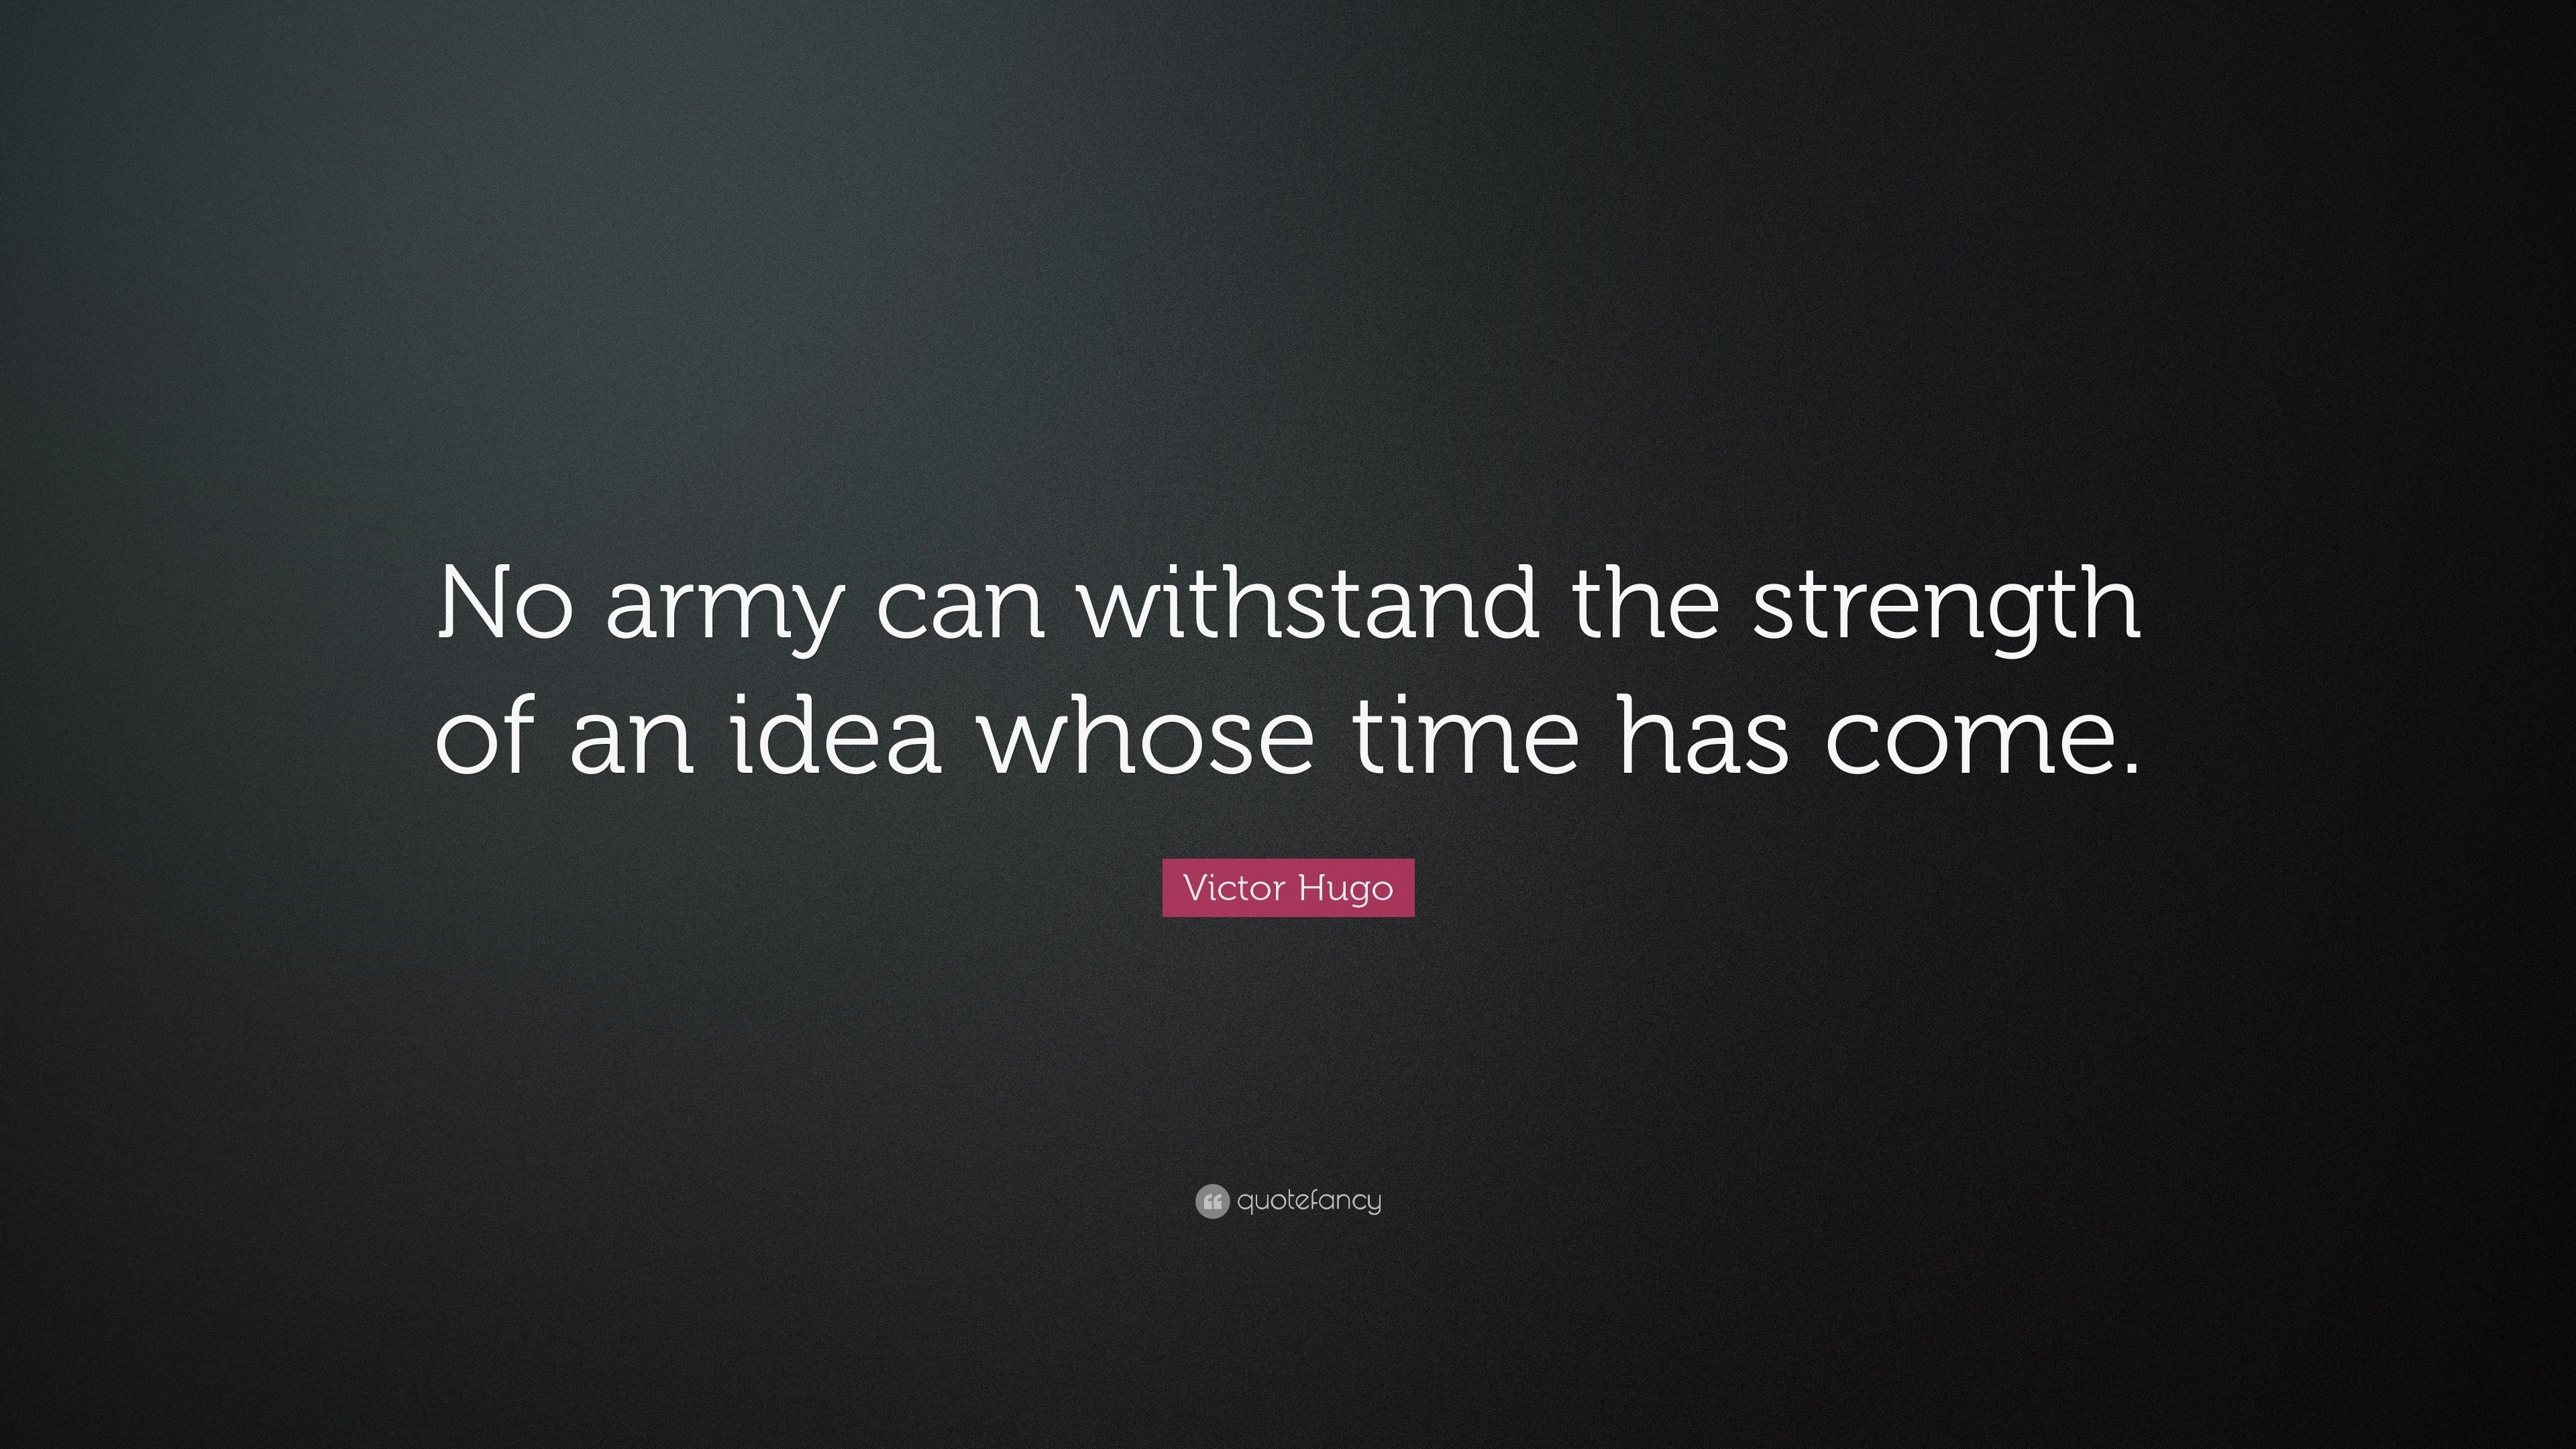 10 Wonderful An Idea Whose Time Has Come victor hugo quote no army can withstand the strength of an idea 6 2022